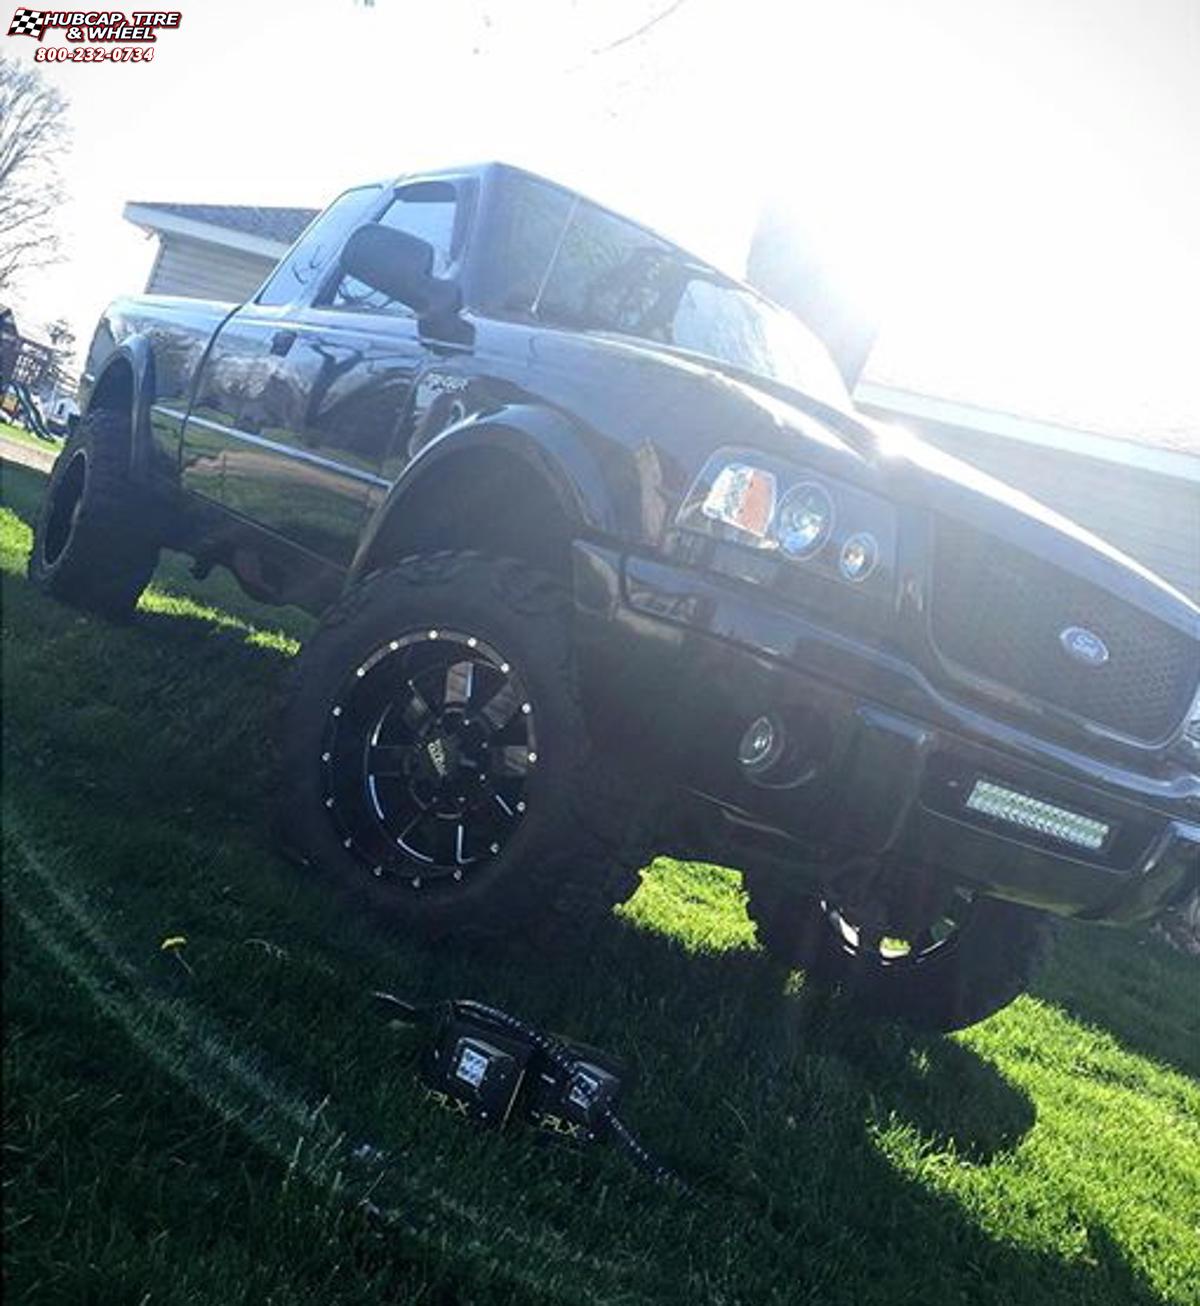 vehicle gallery/ford f150 moto metal mo962  Gloss Black & Milled wheels and rims